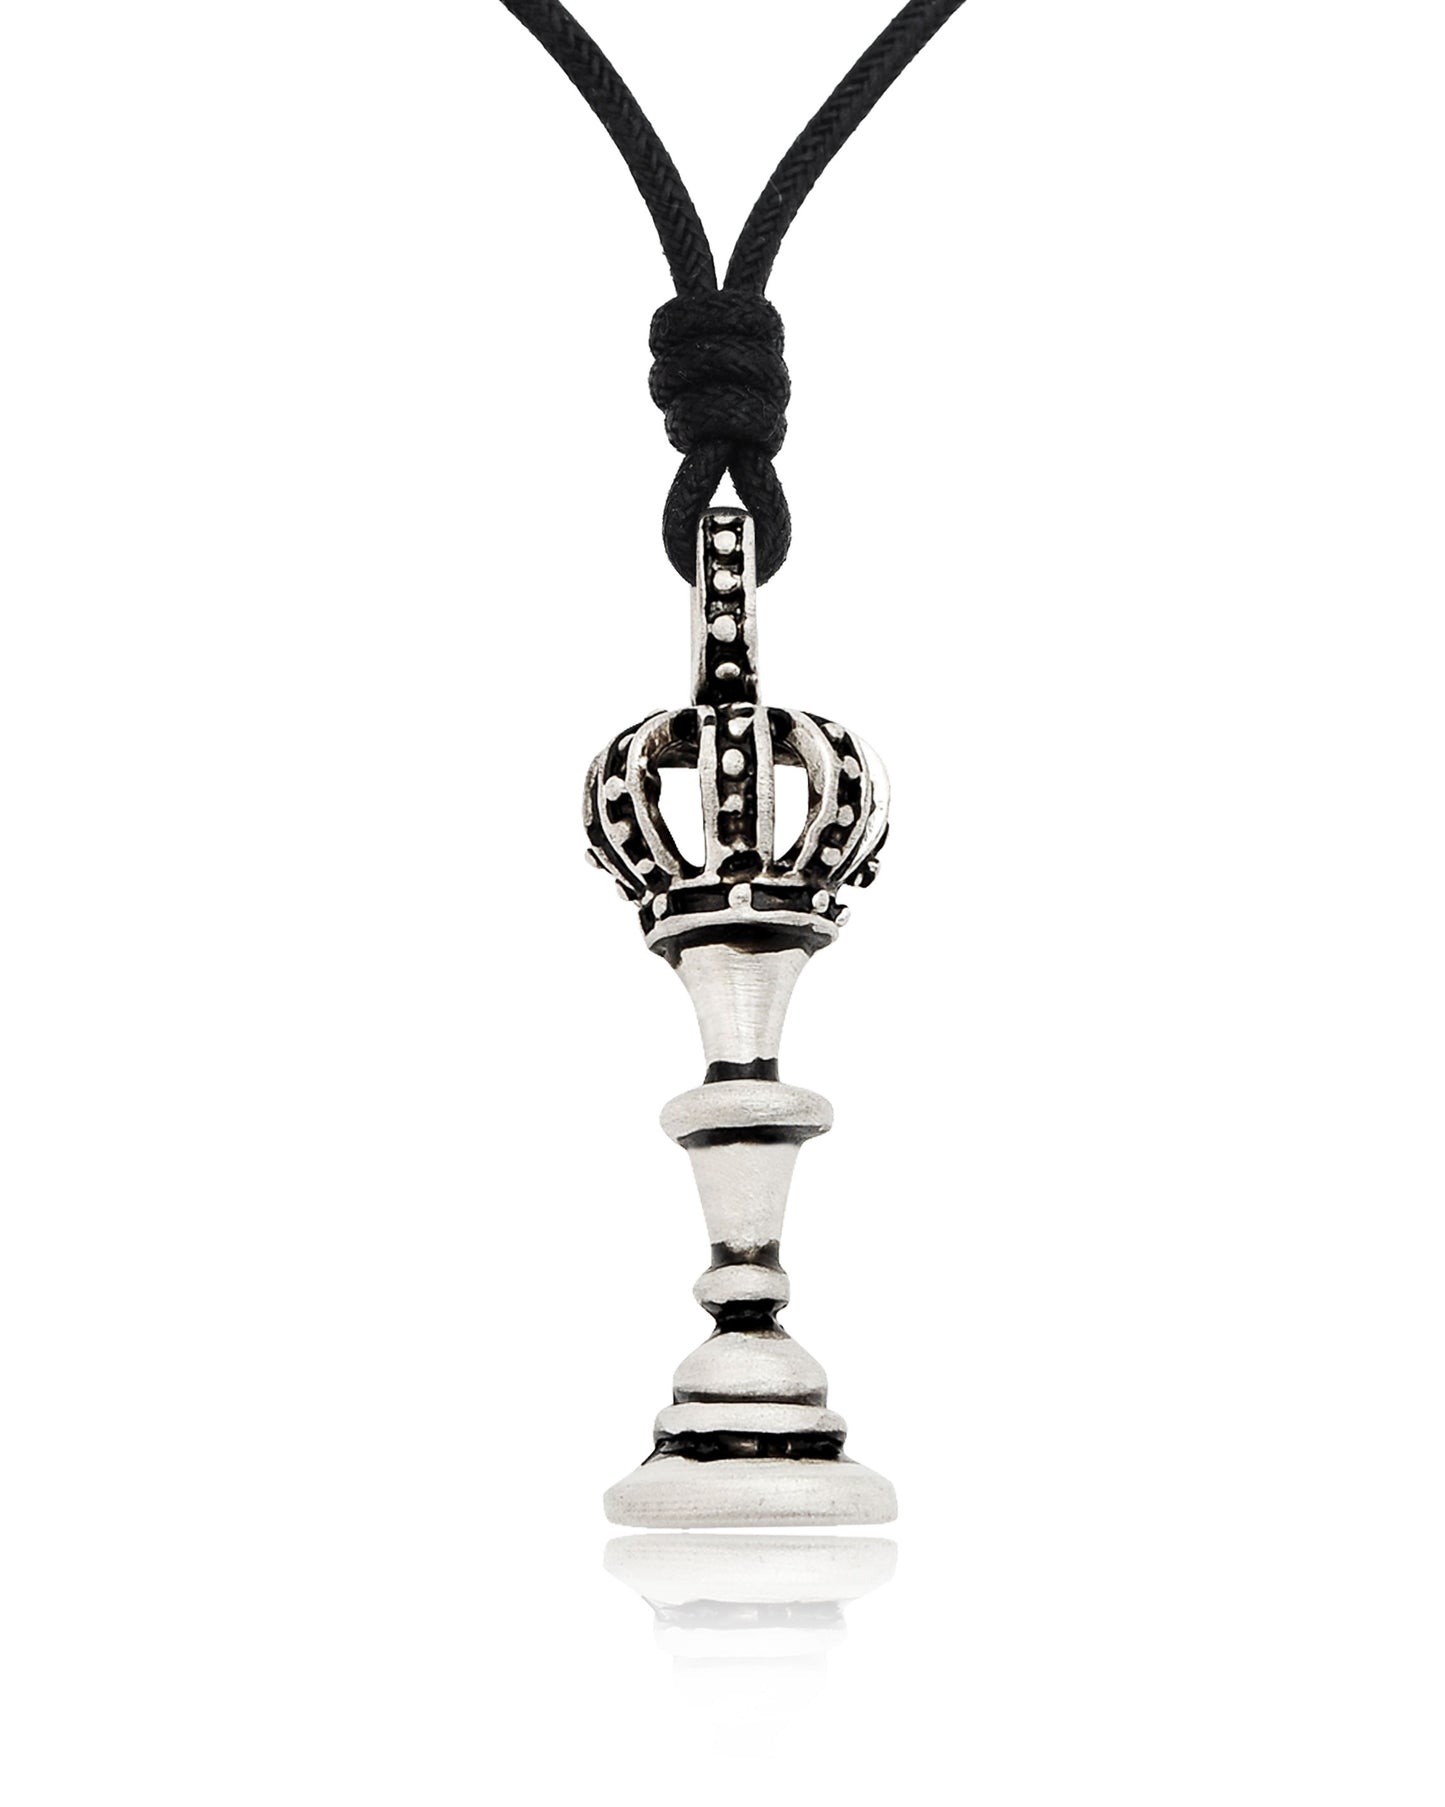 New Crown Silver Pewter Charm Necklace Pendant Jewelry